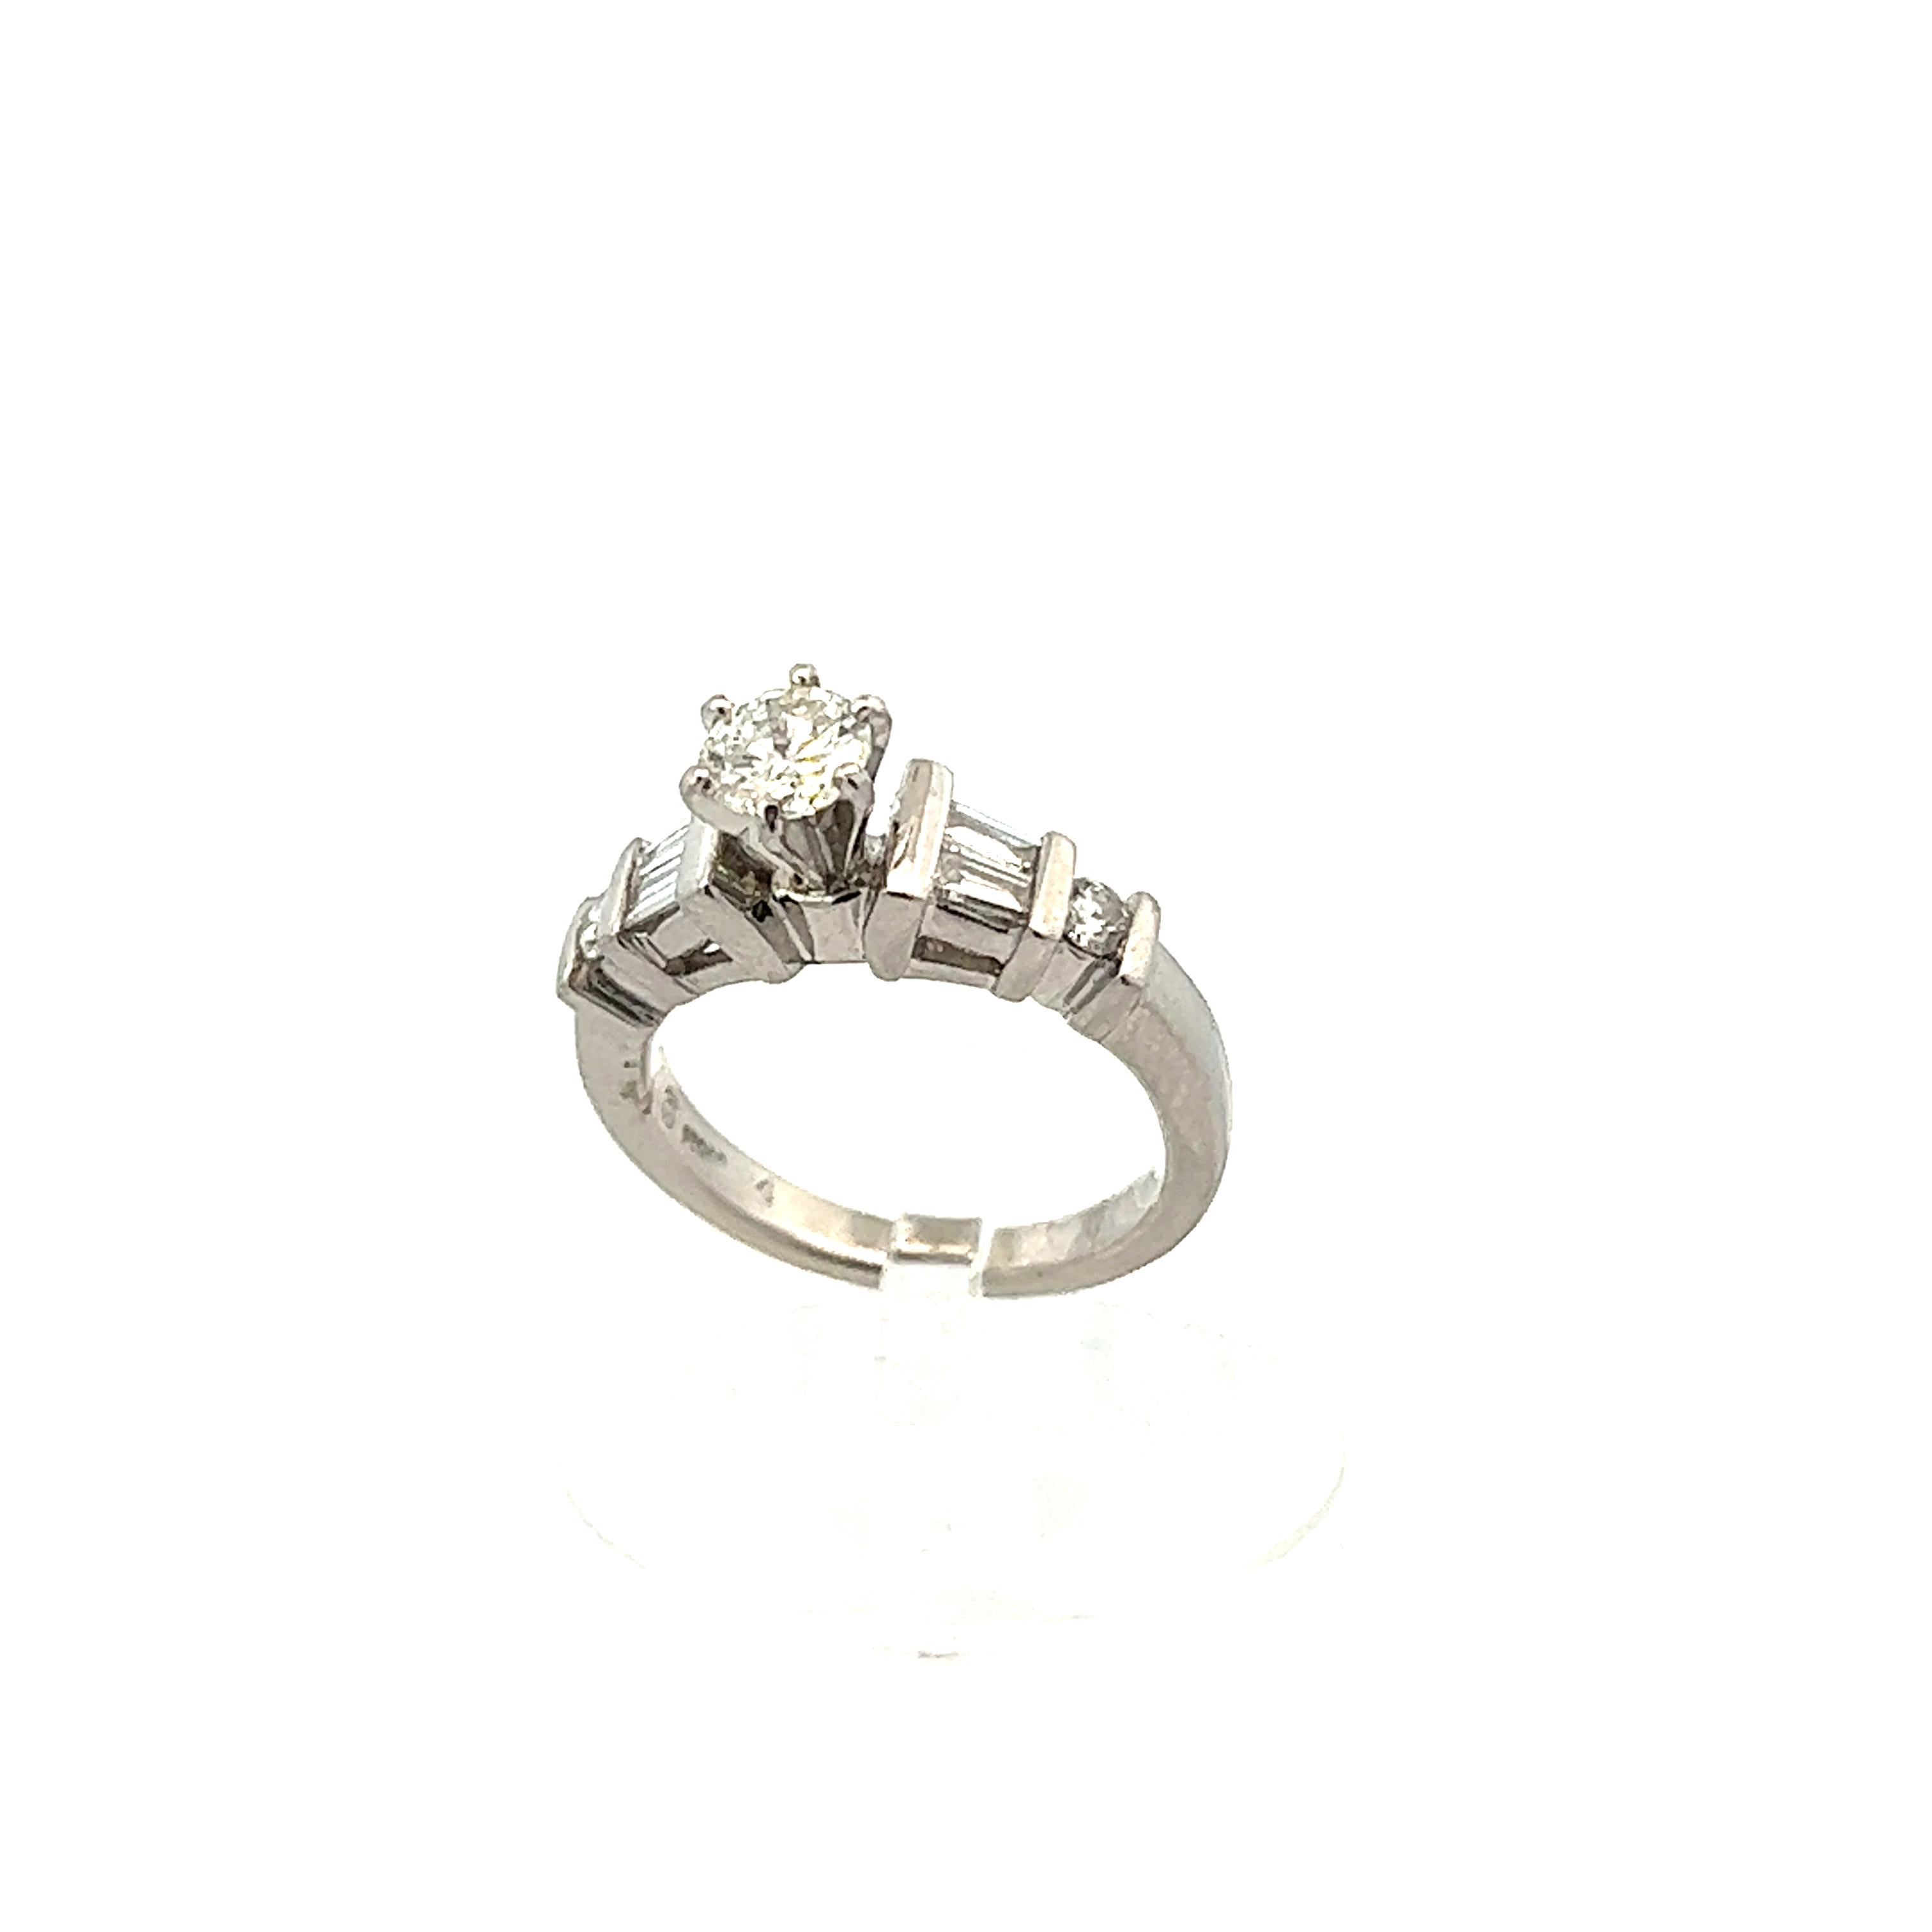 
This 1980s contemporary platinum ring with round and baguette cut diamonds is gorgeous. The design of this ring as well as the materials used makes the ring stand out amongst the best. The ring features a platinum band and raised center stone